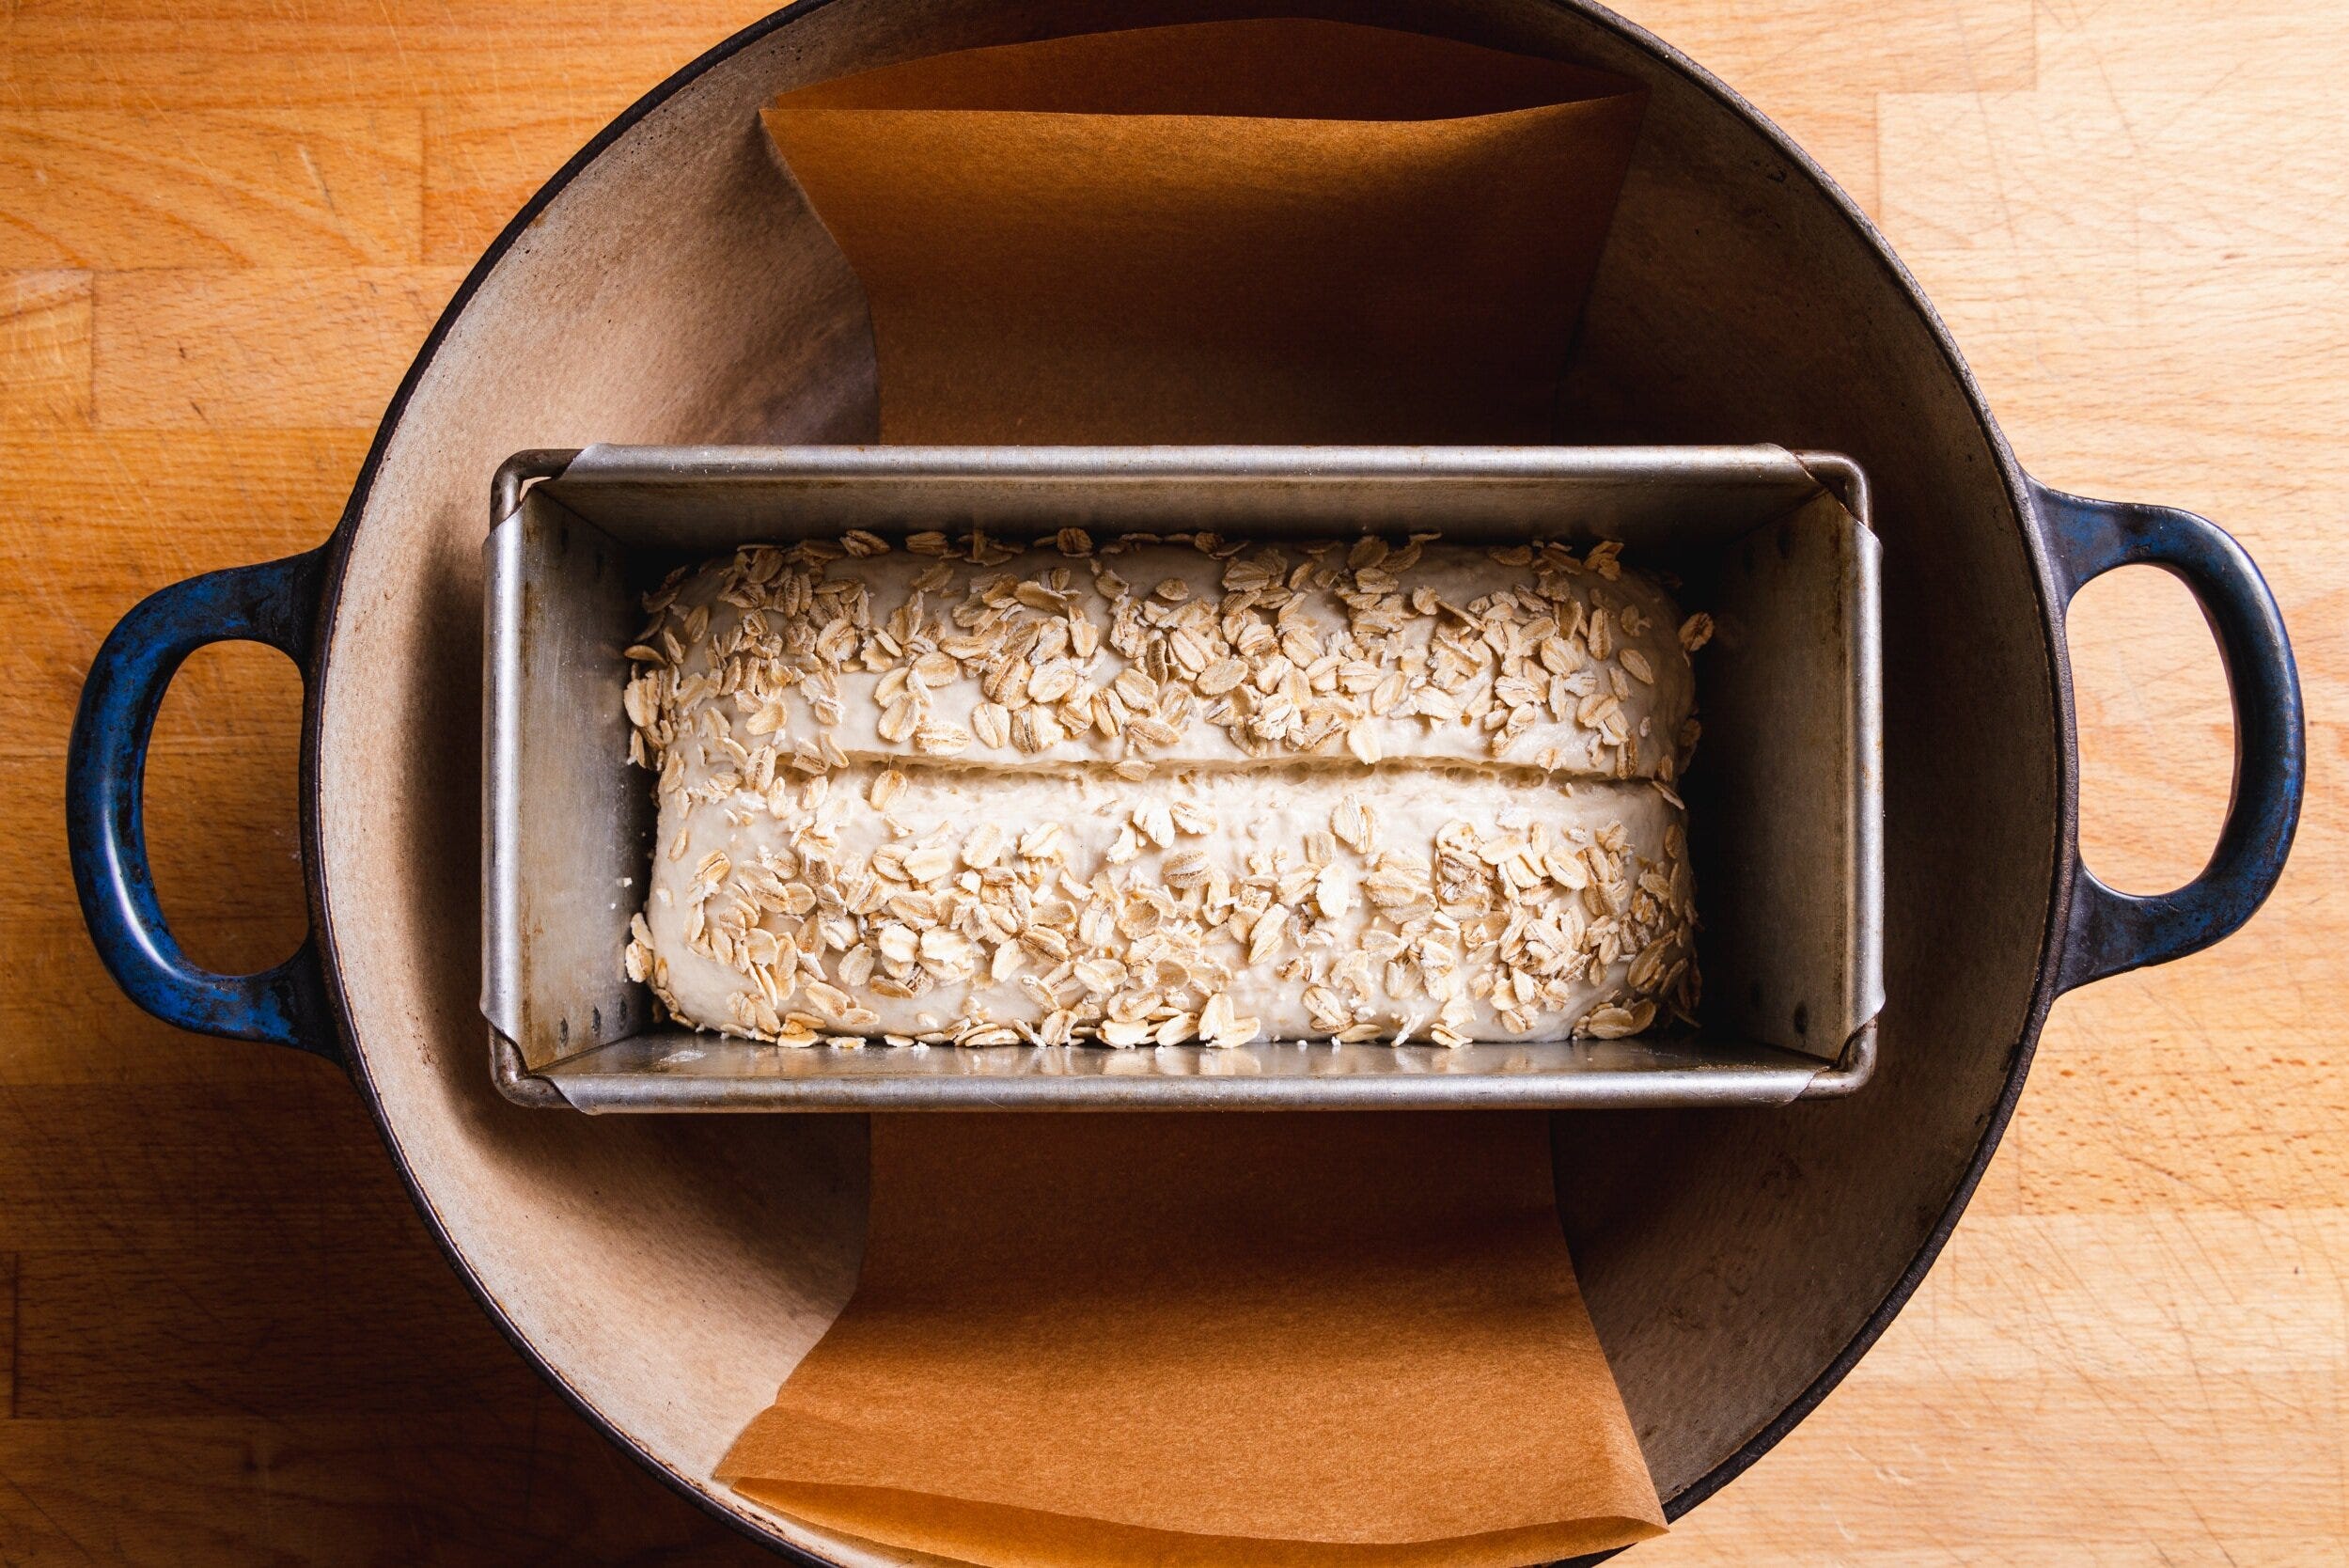 The Challenger Bread Pan Is Here to Change the Way You Bake